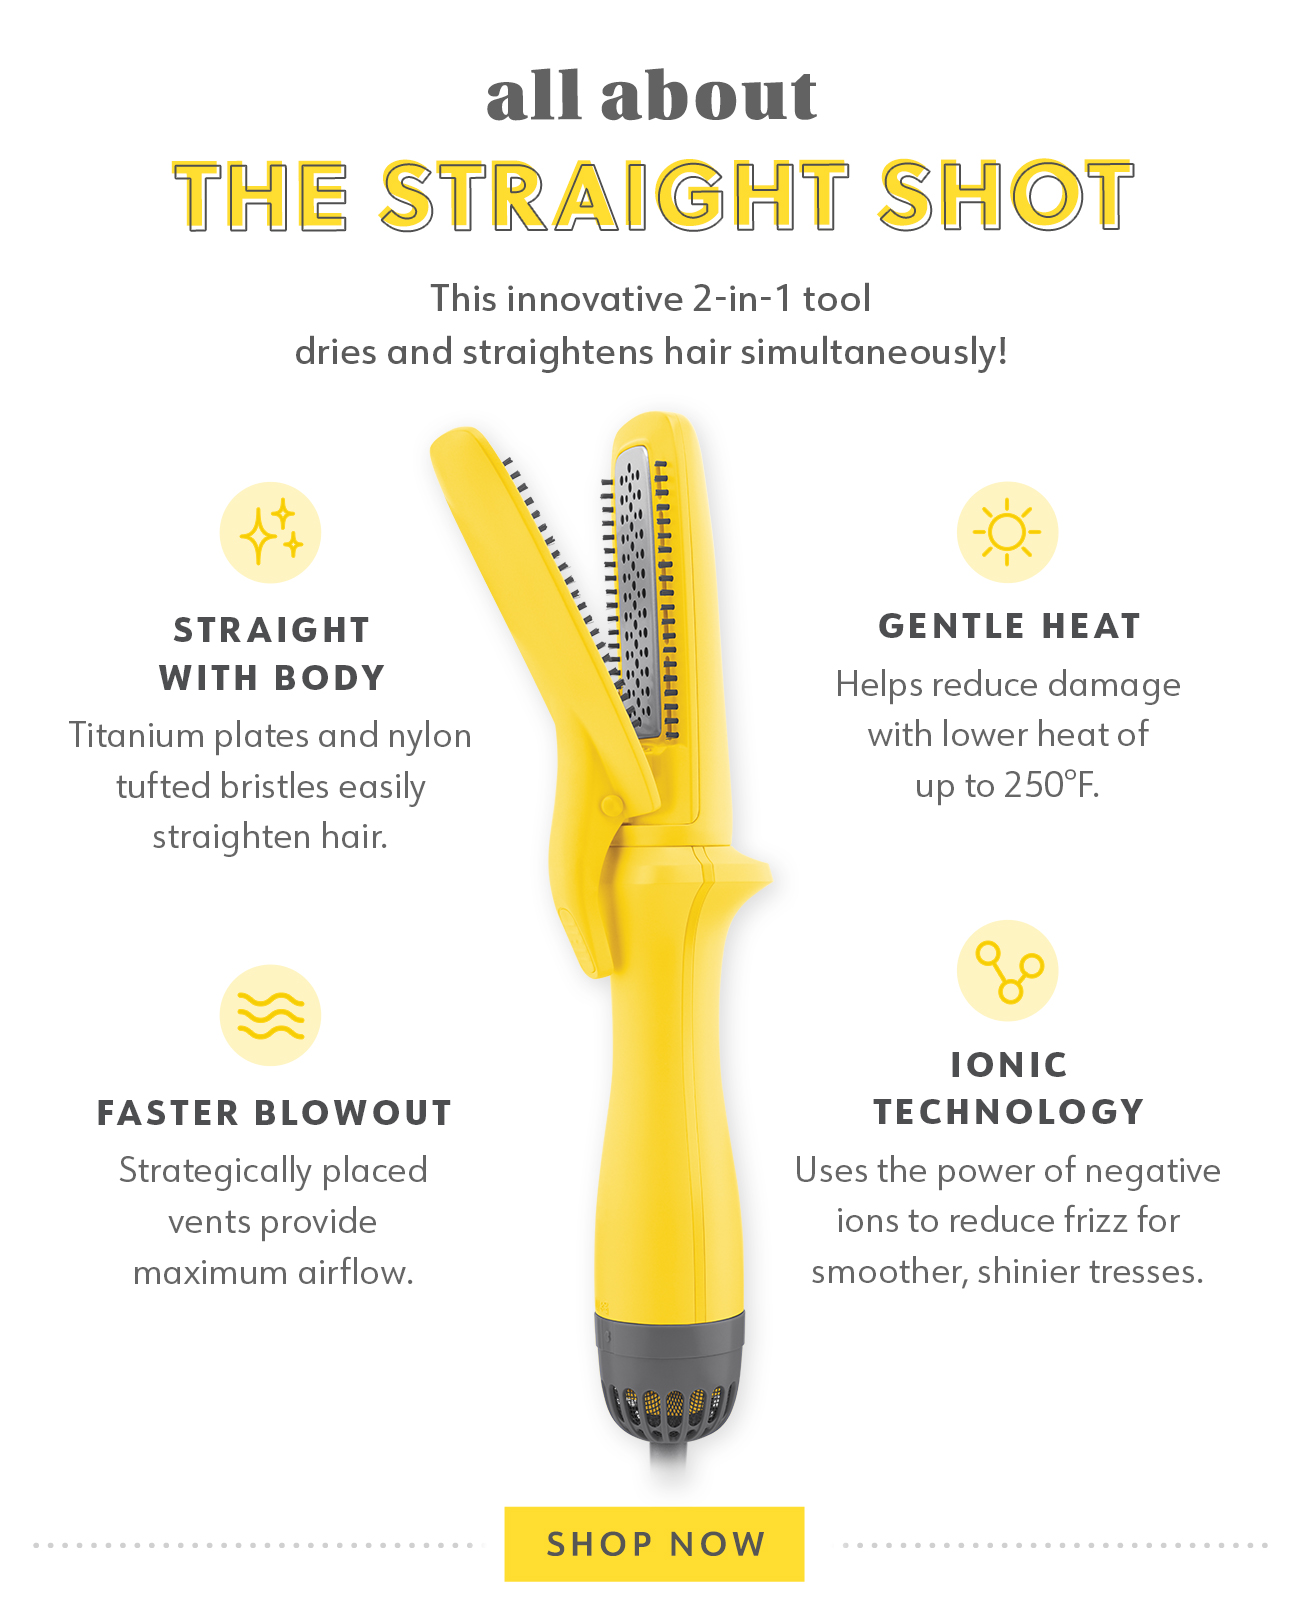 all about THE STRAIGHT SHOT This innovative 2-in-1 tool dries and straightens hair simultaneously! Il 4 XX STRAIGHT GENTLE HEAT WITH BODY Helps reduce damage with lower heat of up to 250F. Titanium plates and nylon tufted bristles easily straighten hair. e NN X IONIC FASTER BLOWOUT TECHNOLOGY Strategically placed Uses the power of negative vents provide ions to reduce frizz for maximum airflow. smoother, shinier tresses. 